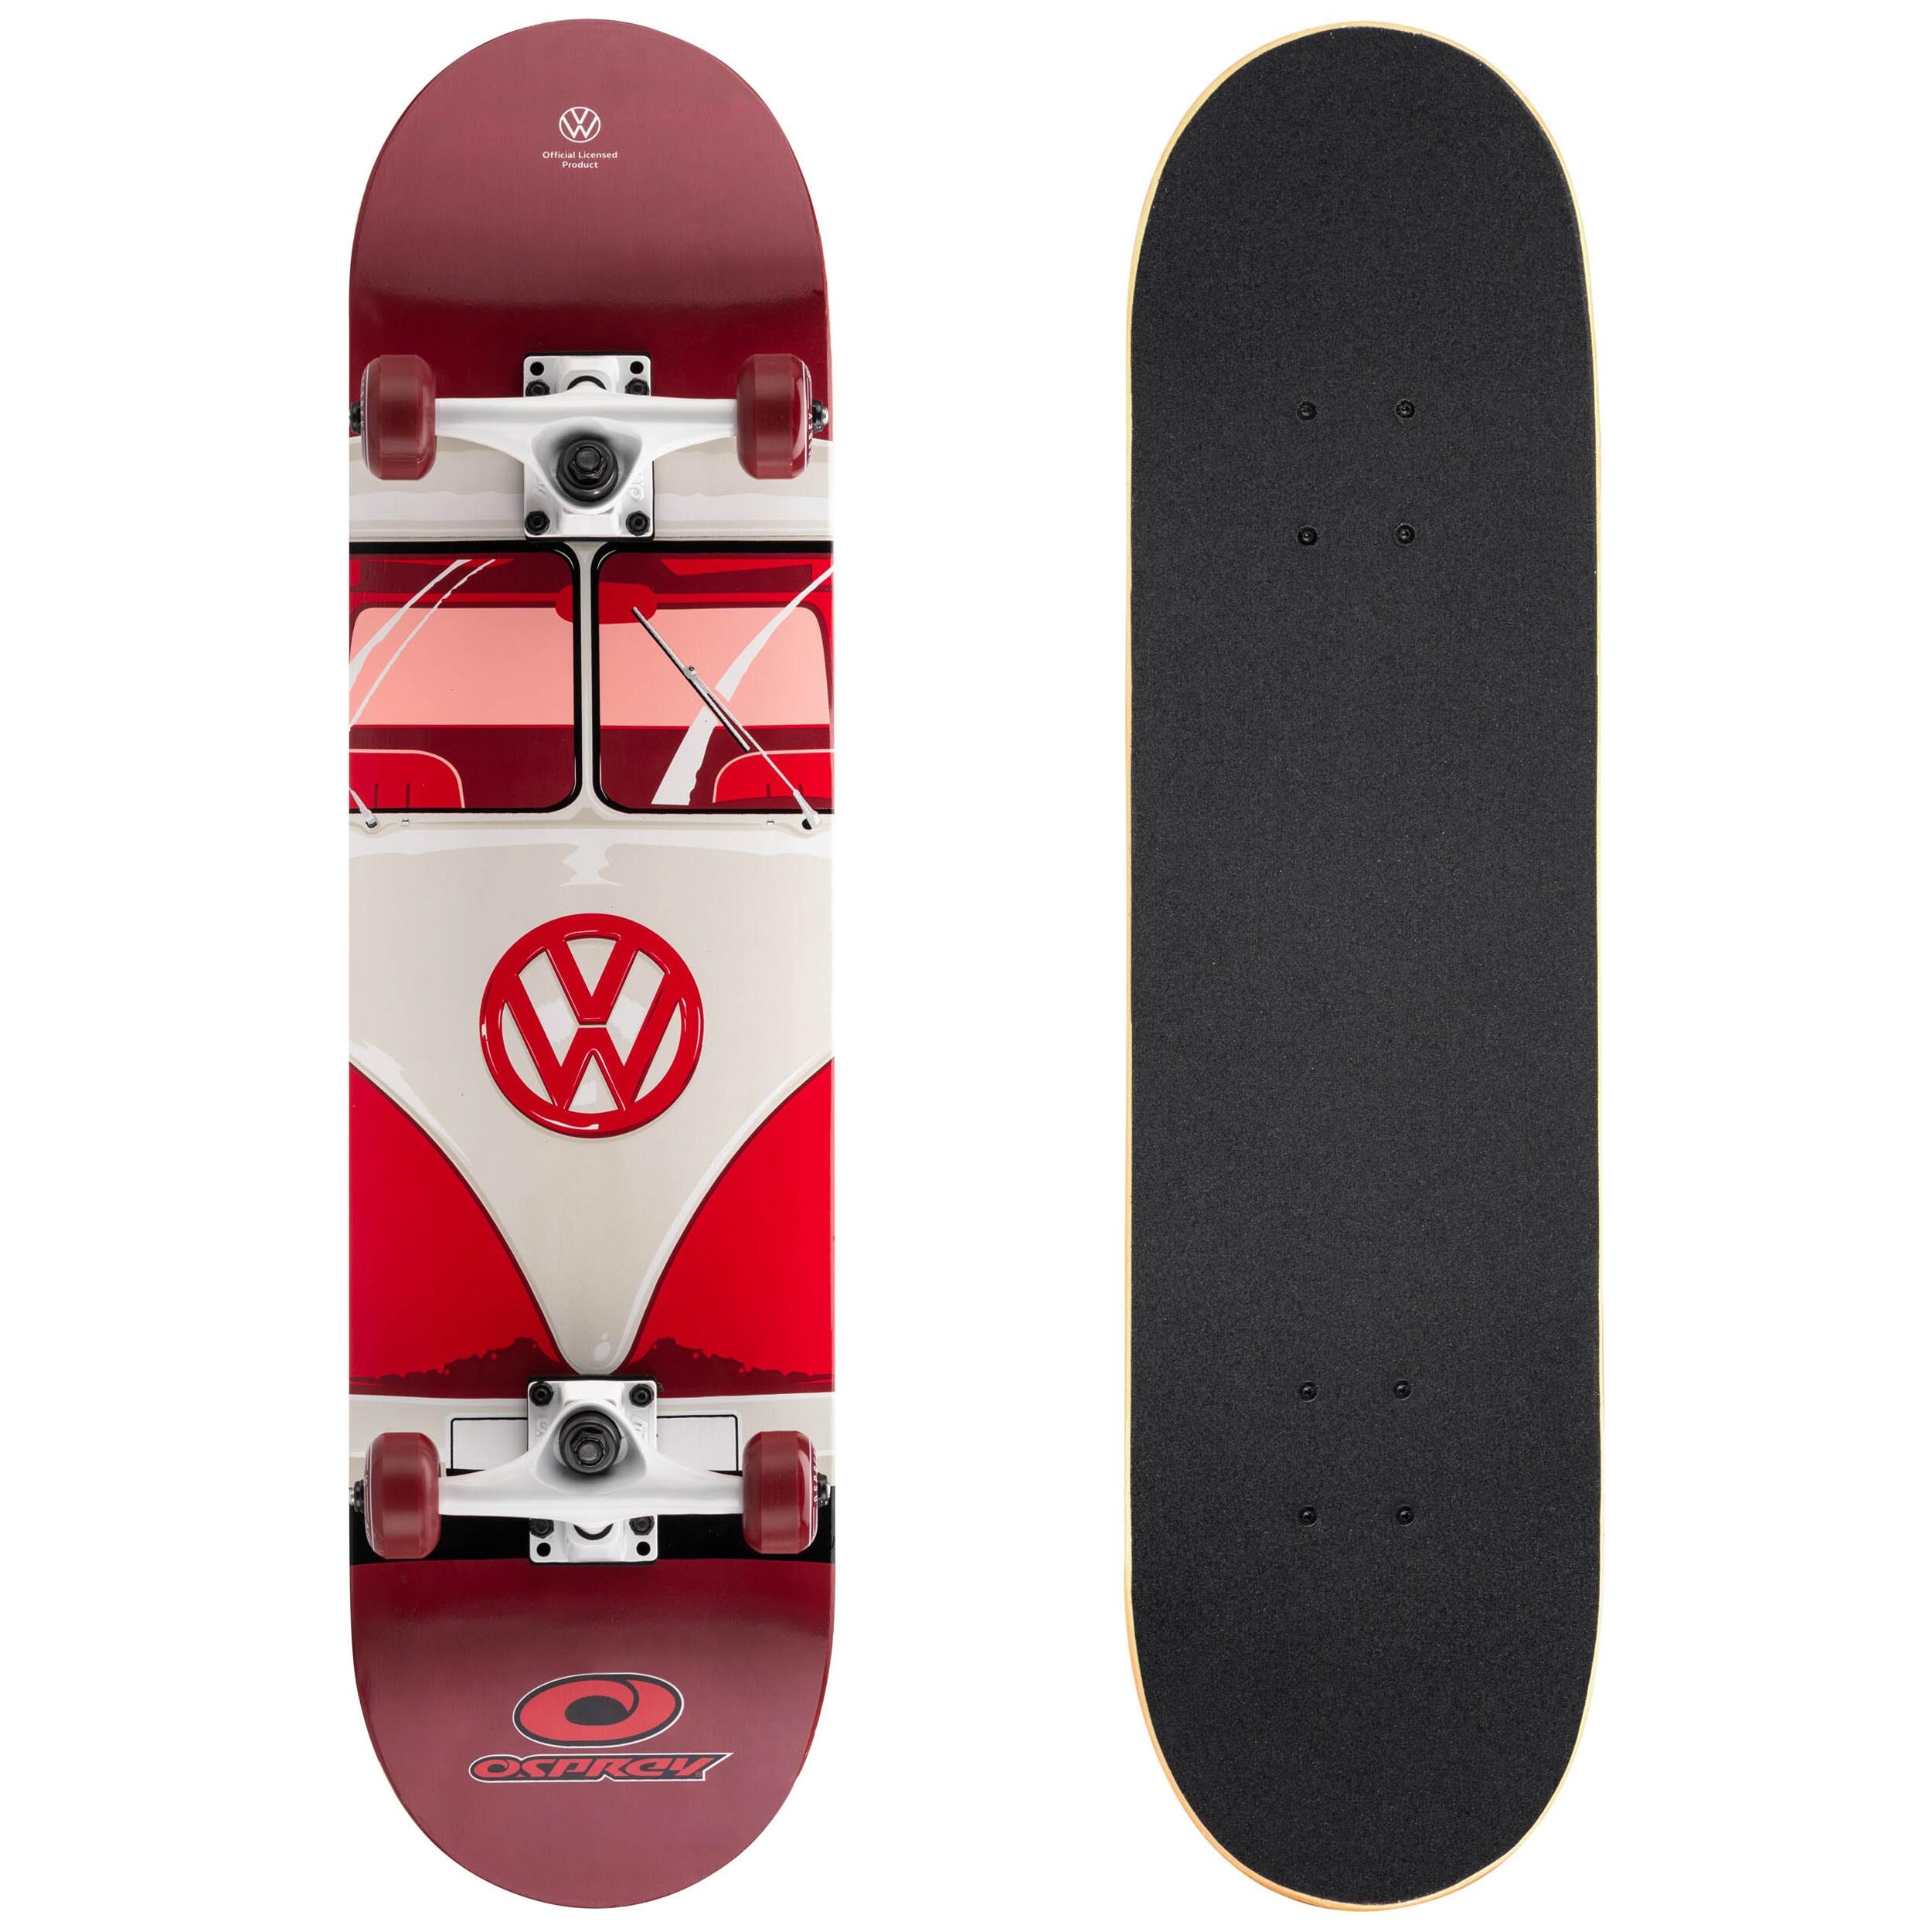 VW Complete Double Kick Skateboard, Maple Concave Deck 1 and Only 1/4